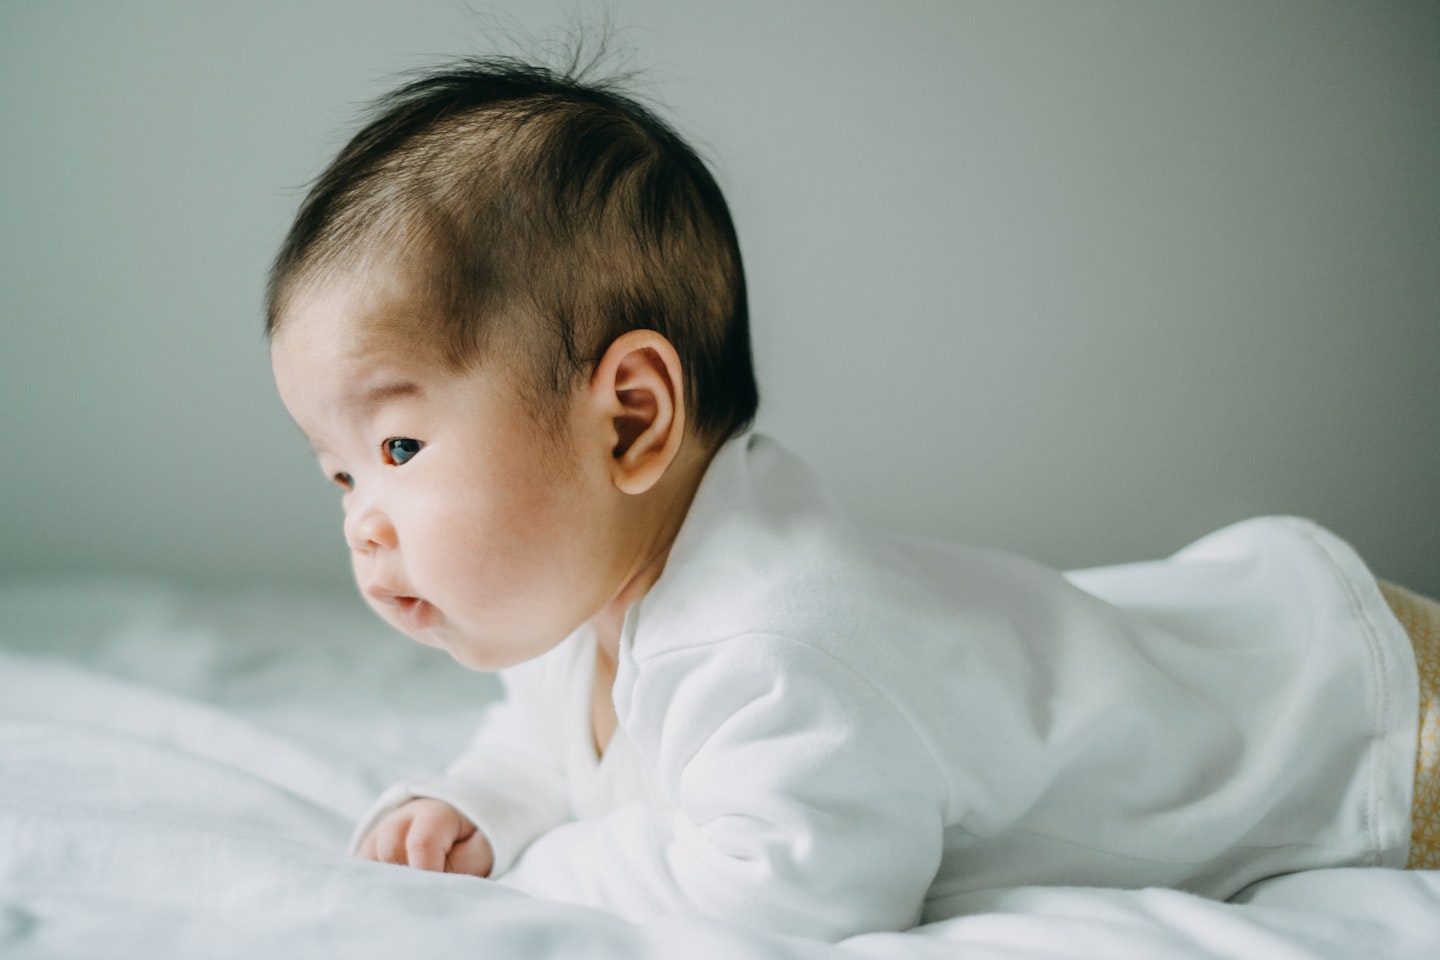 Tummy time: Helping your baby